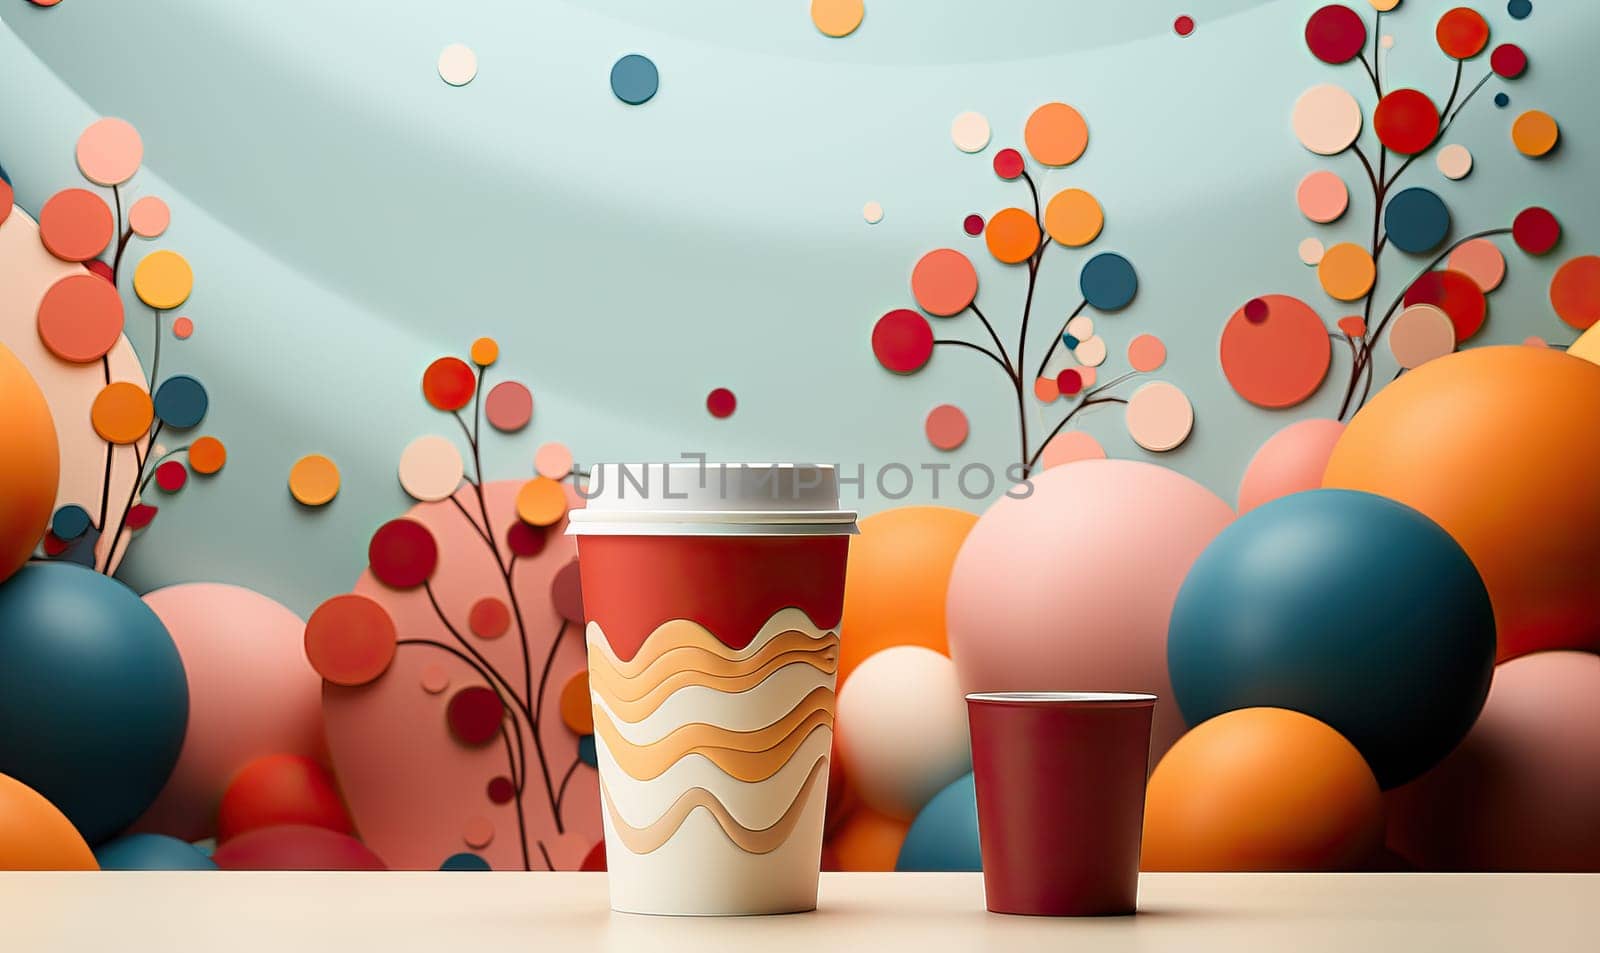 Drink cup with lid on abstract background. by Fischeron